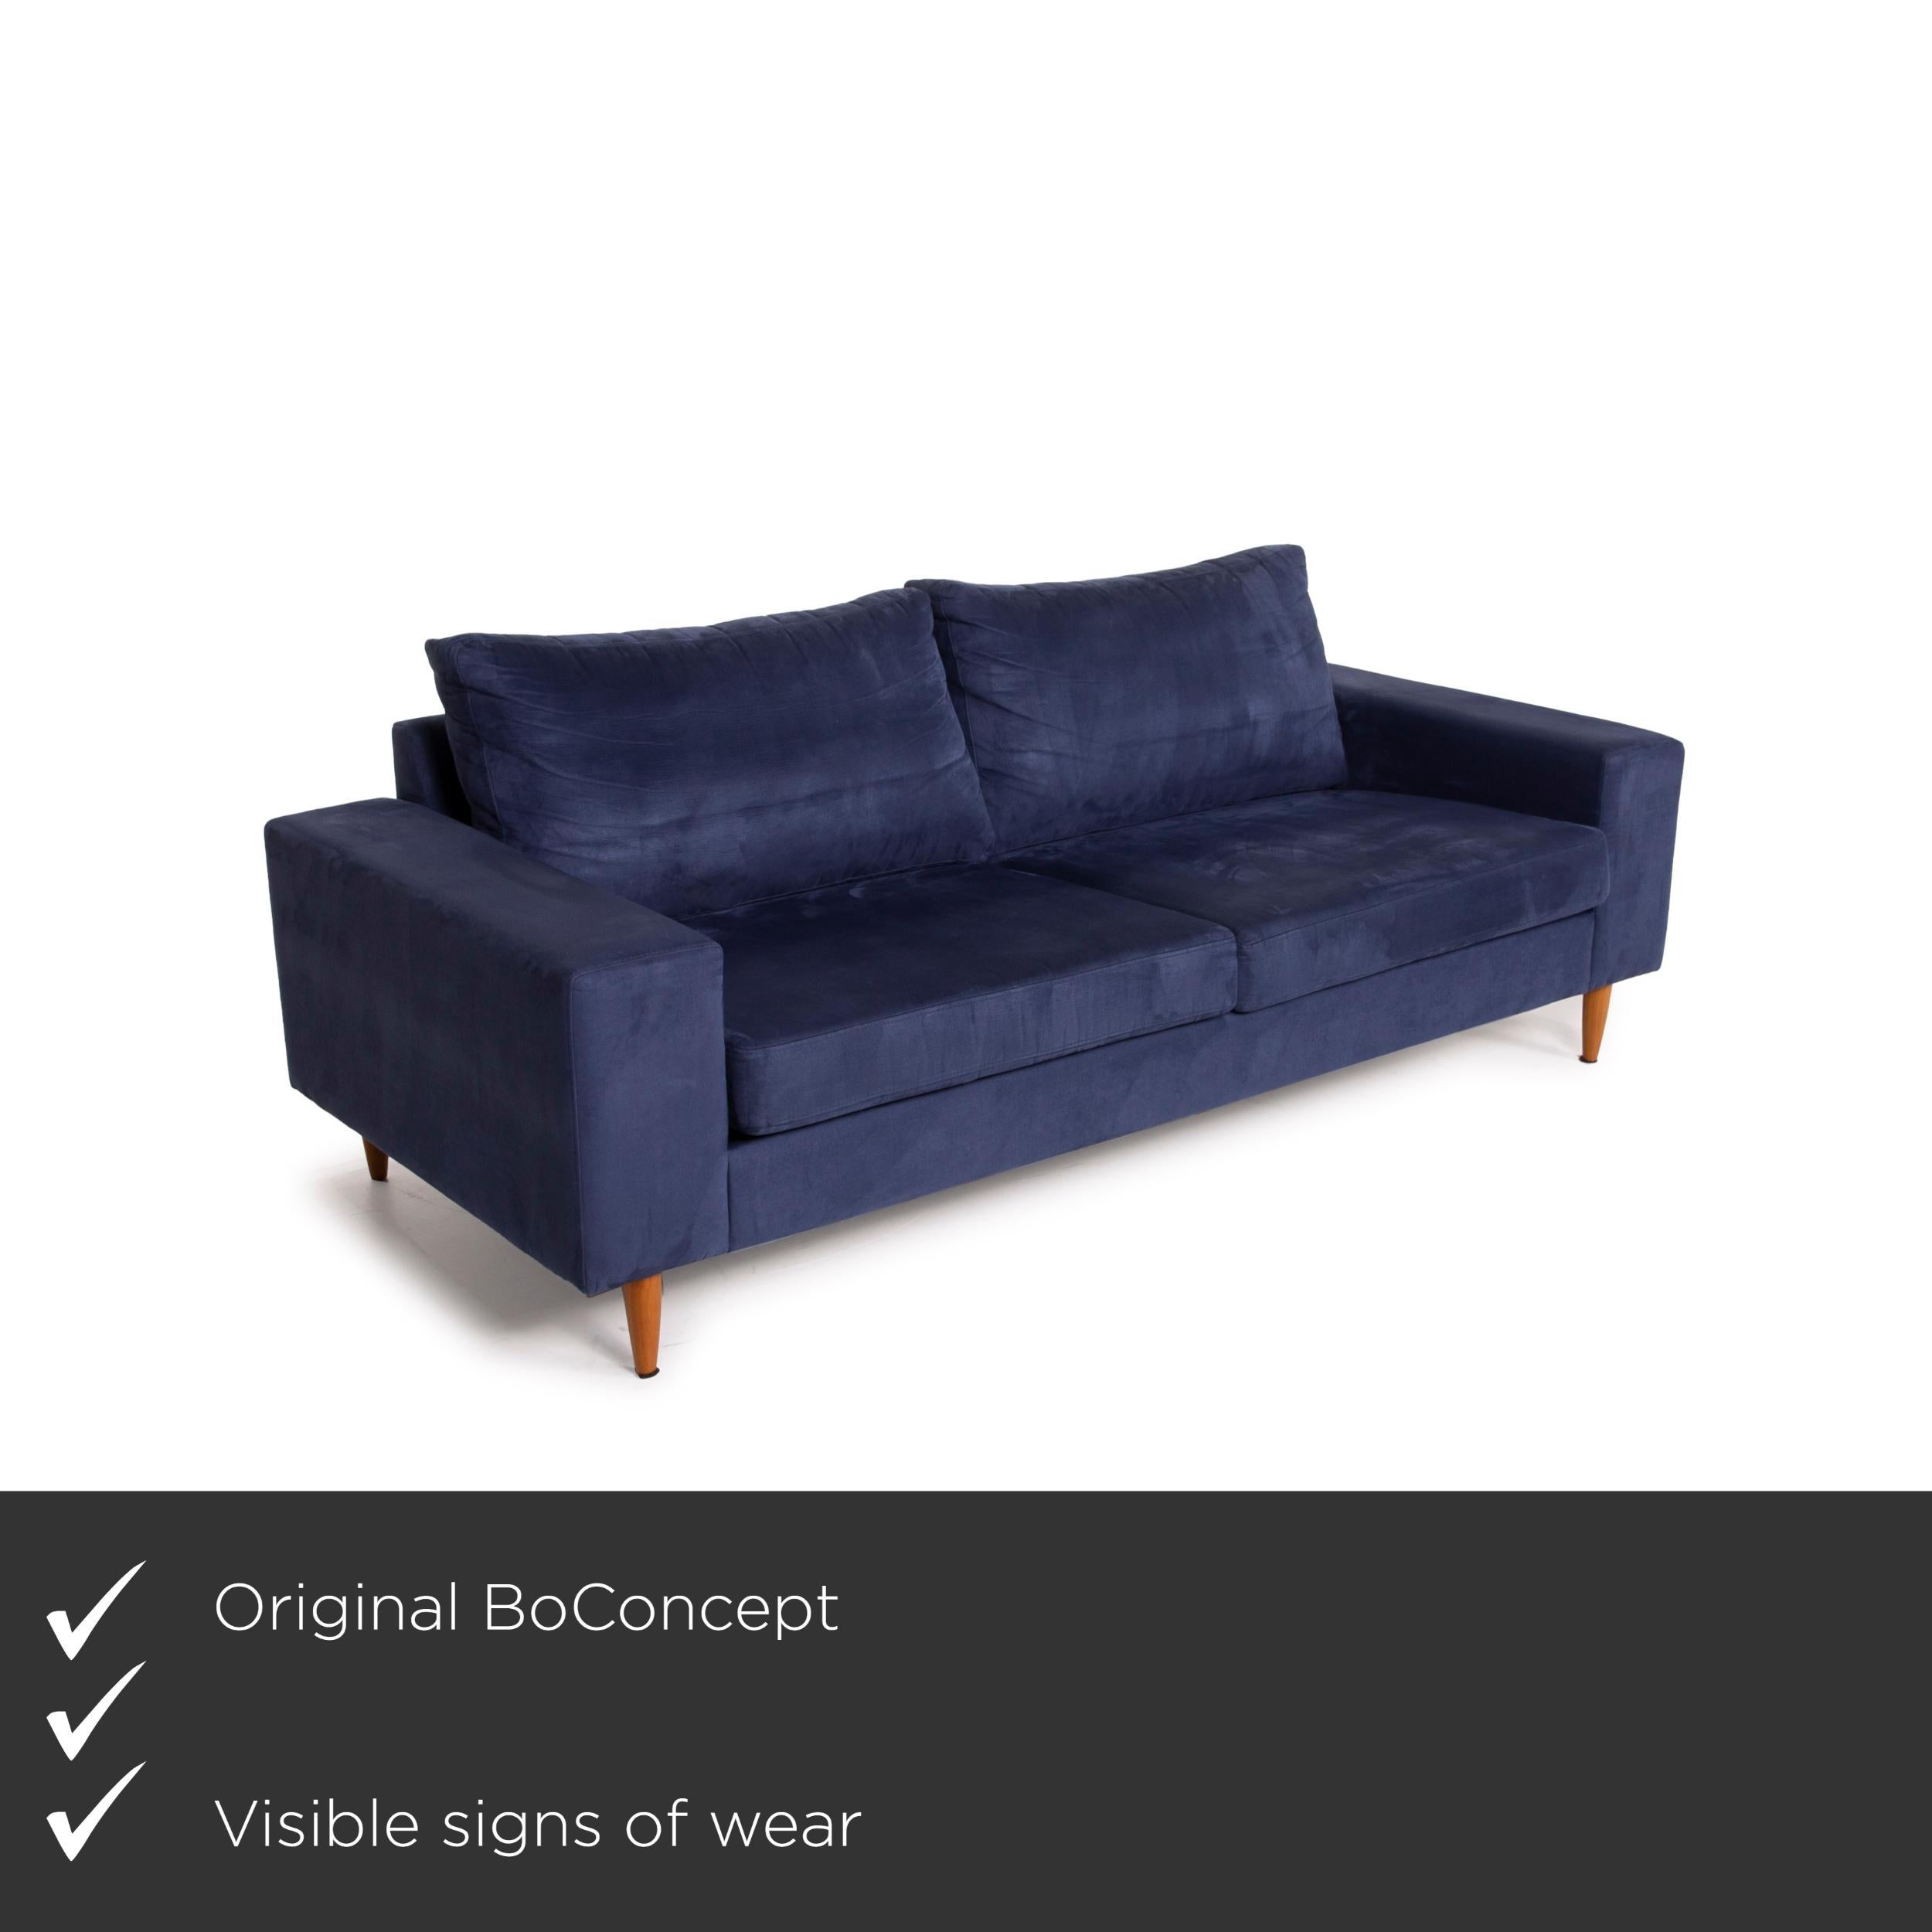 We present to you a BoConcept Indivi 2 fabric sofa blue three-seater.
 

 Product measurements in centimeters:
 

Depth: 91
Width: 204
Height: 78
Seat height: 45
Rest height: 56
Seat depth: 54
Seat width: 161
Back height: 35.
 